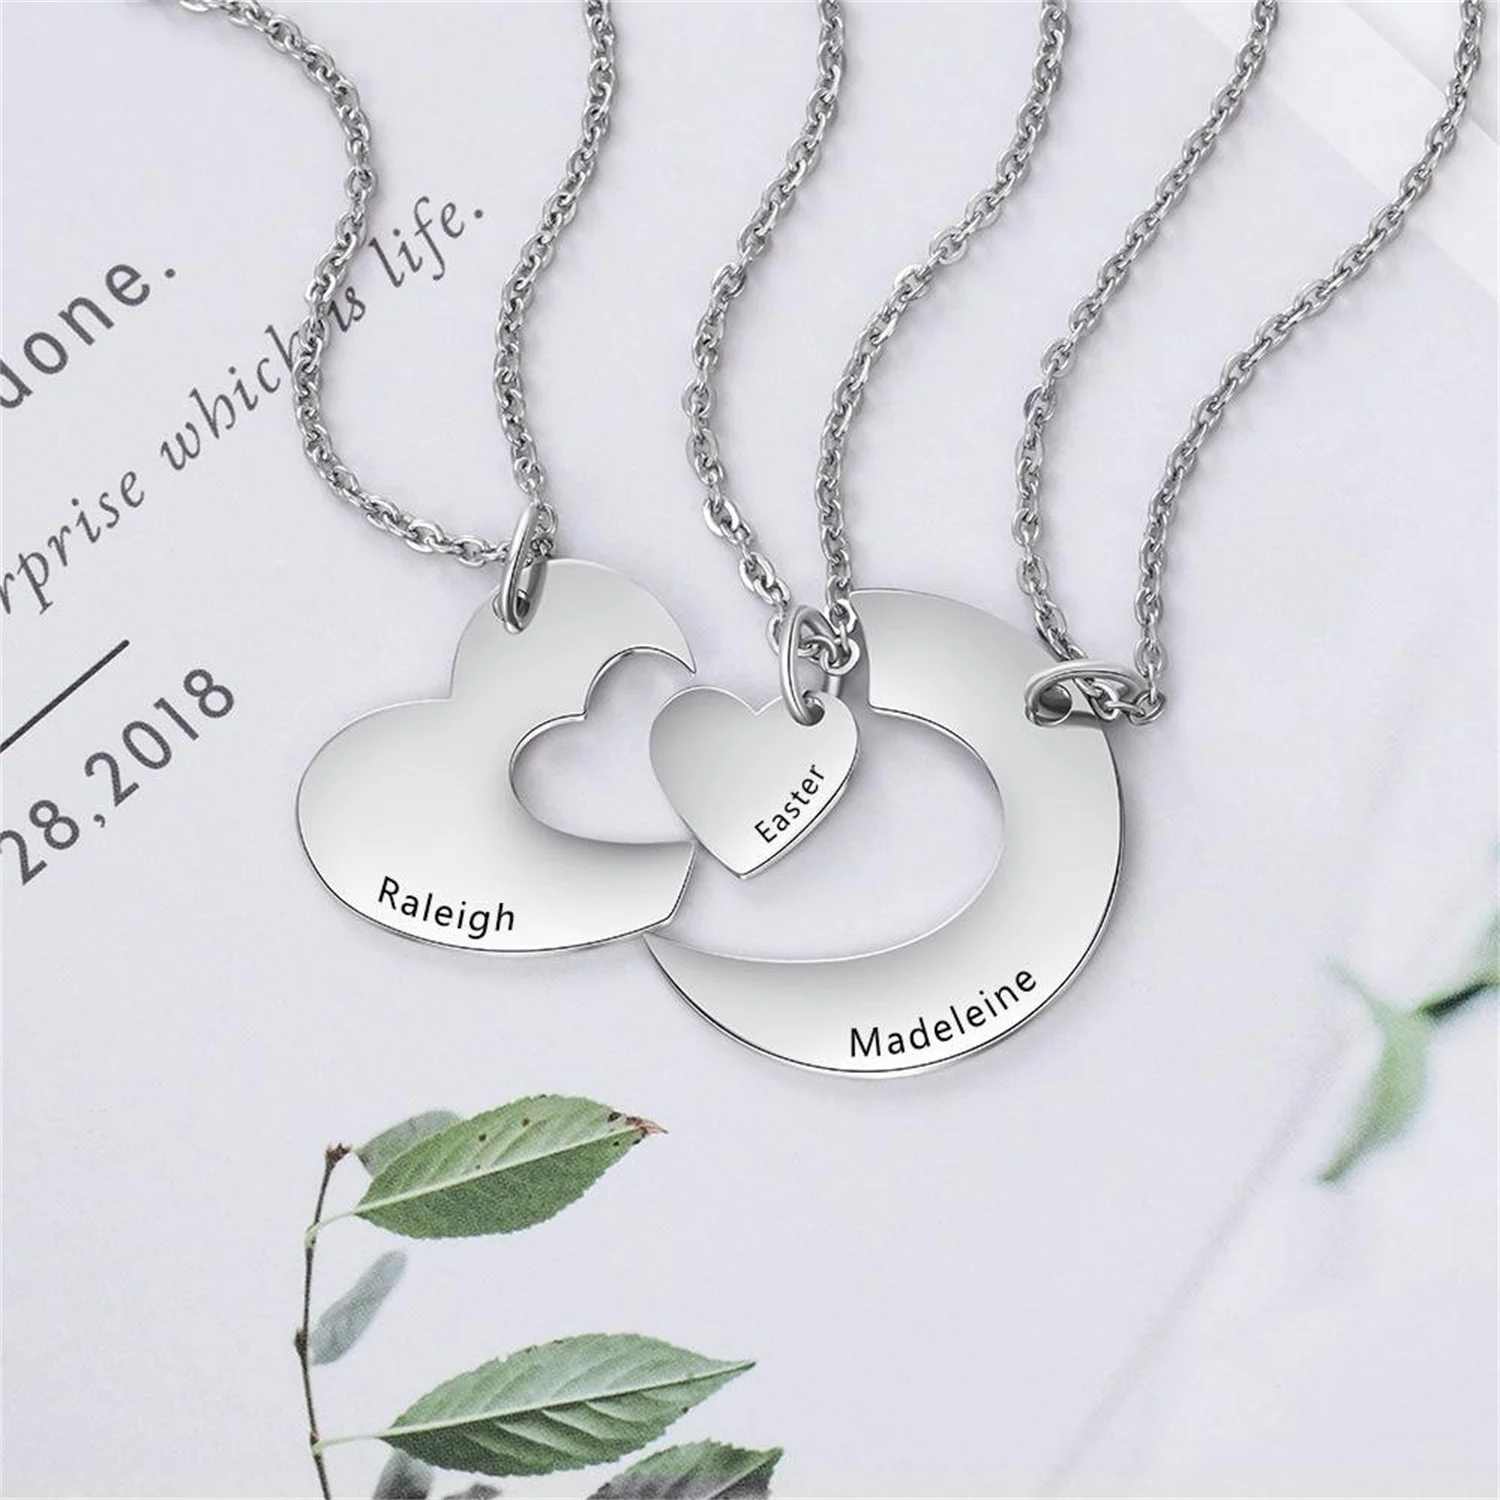 Personalized Heart Matching Necklace Engraved 3 Names Friendship BFF  Necklaces For Girls Sisters Family Pendant Jewelry Gift